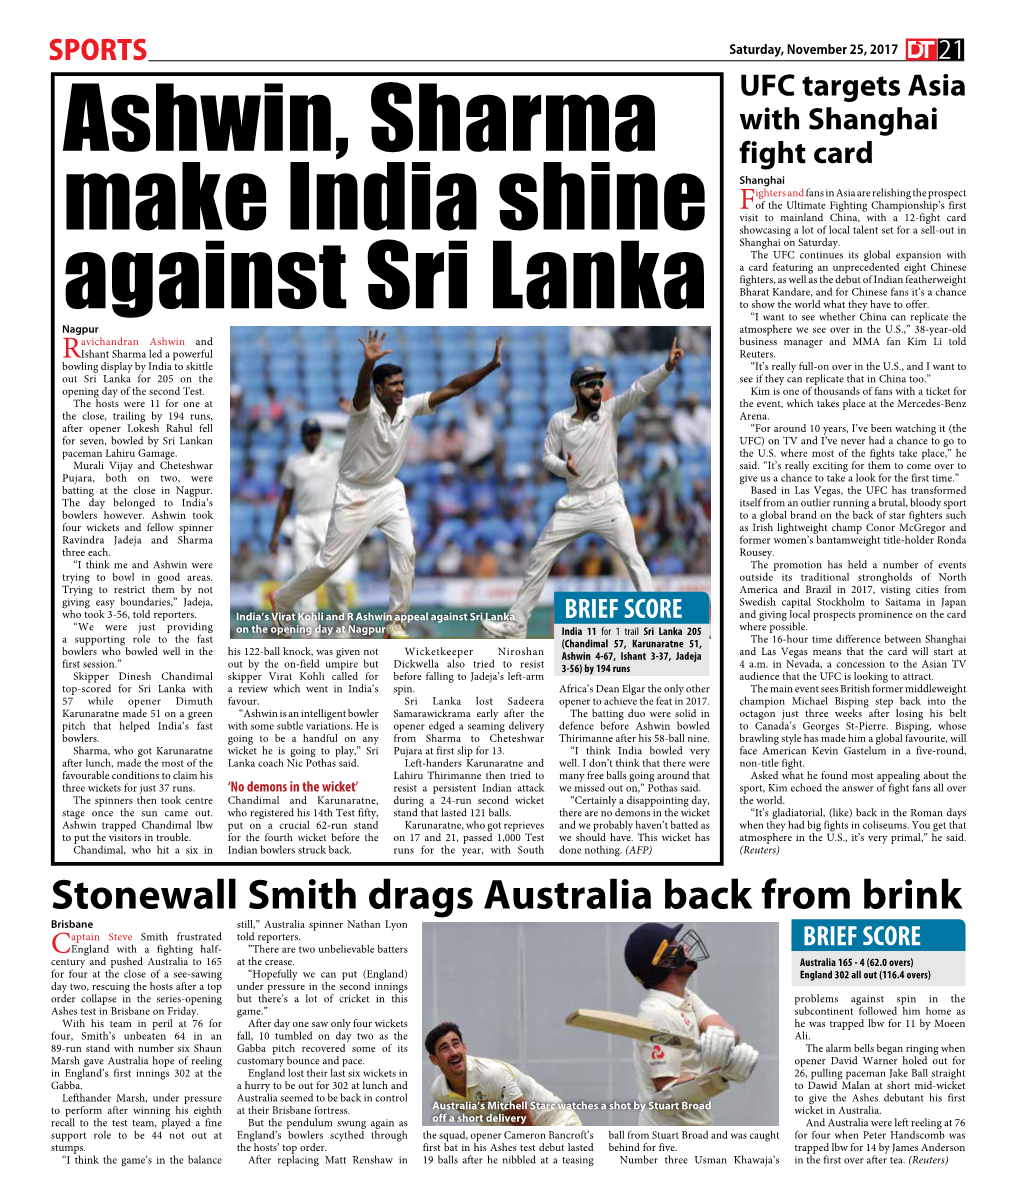 Stonewall Smith Drags Australia Back from Brink